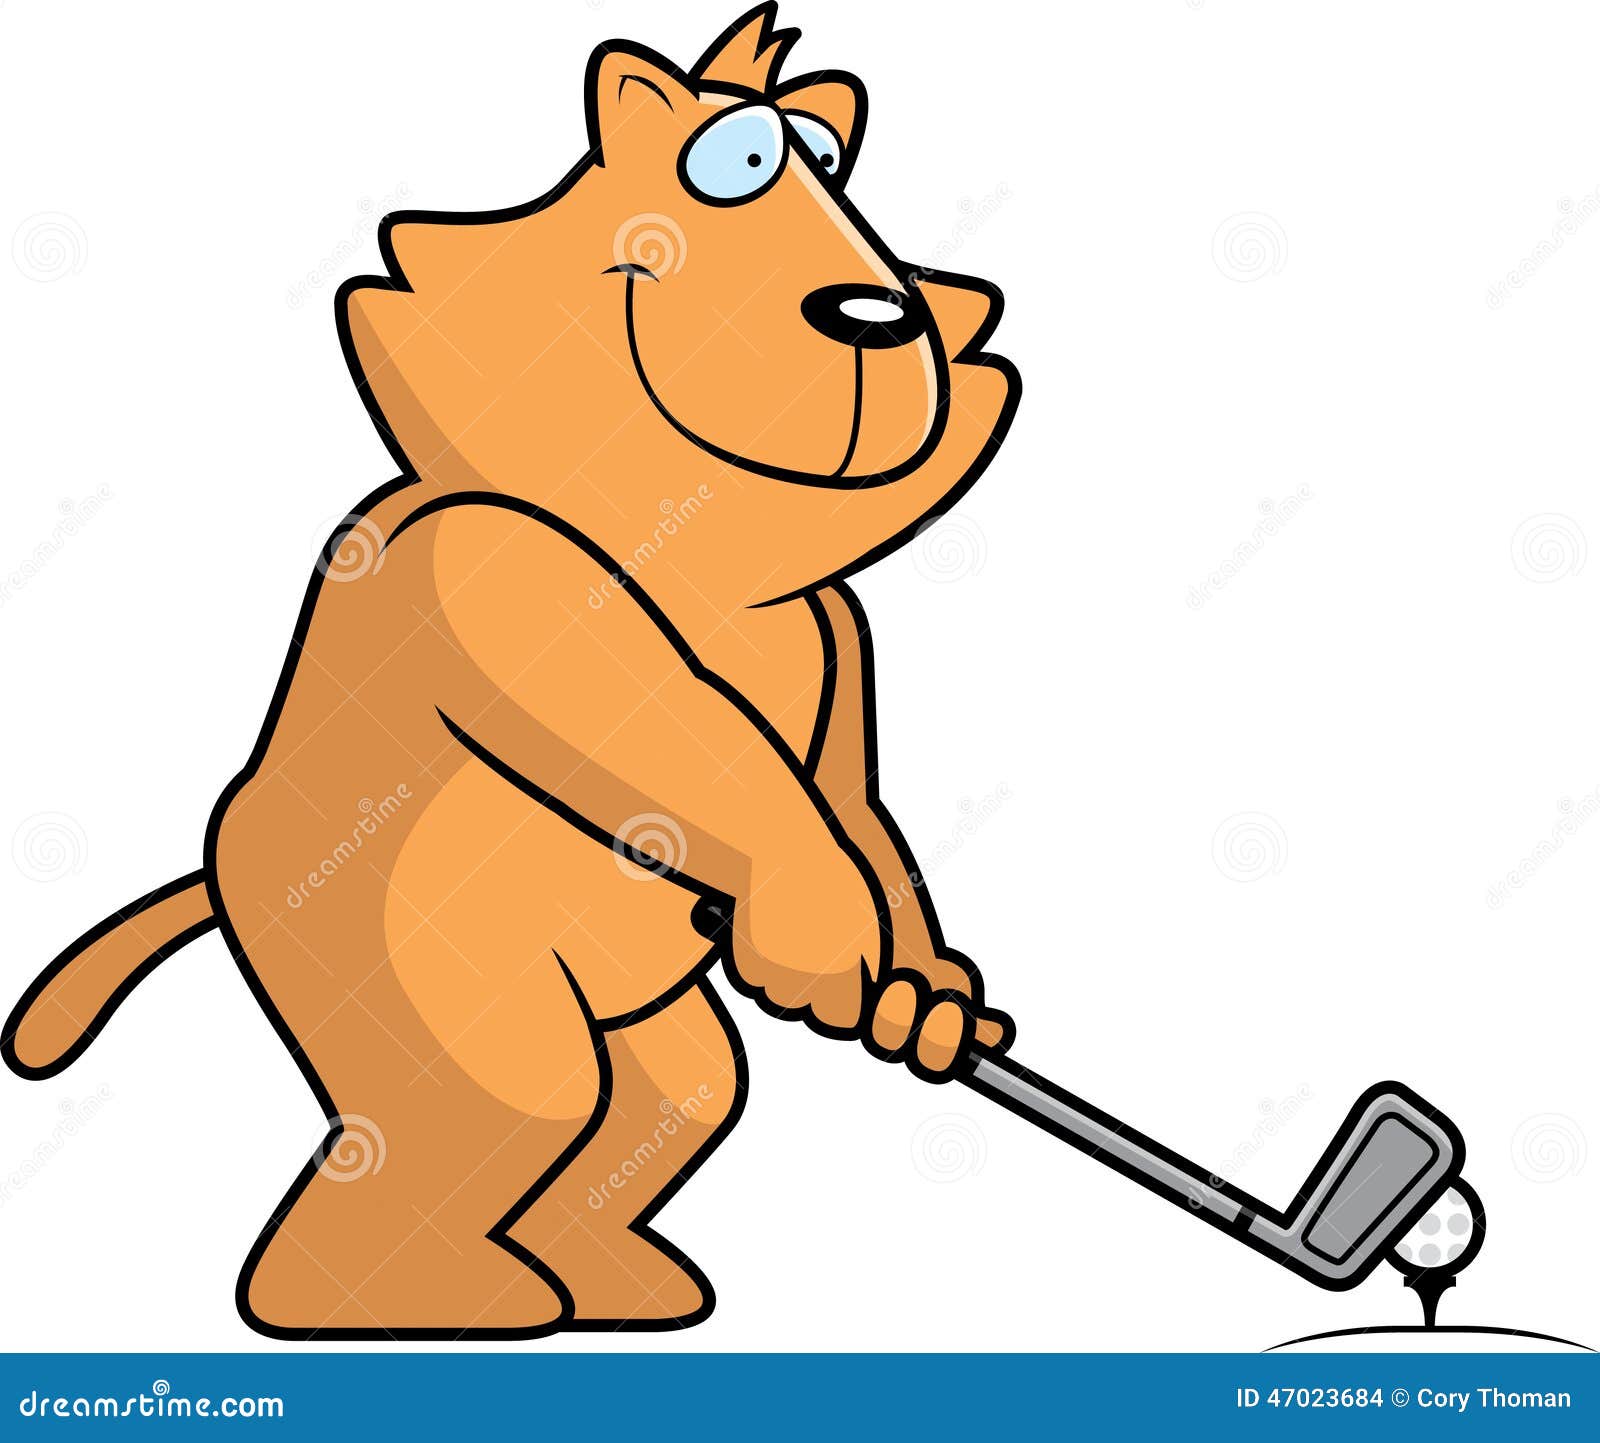 Cartoon Cat Golfing Stock Vector Image 47023684 intended for golfing cat with regard to Comfy